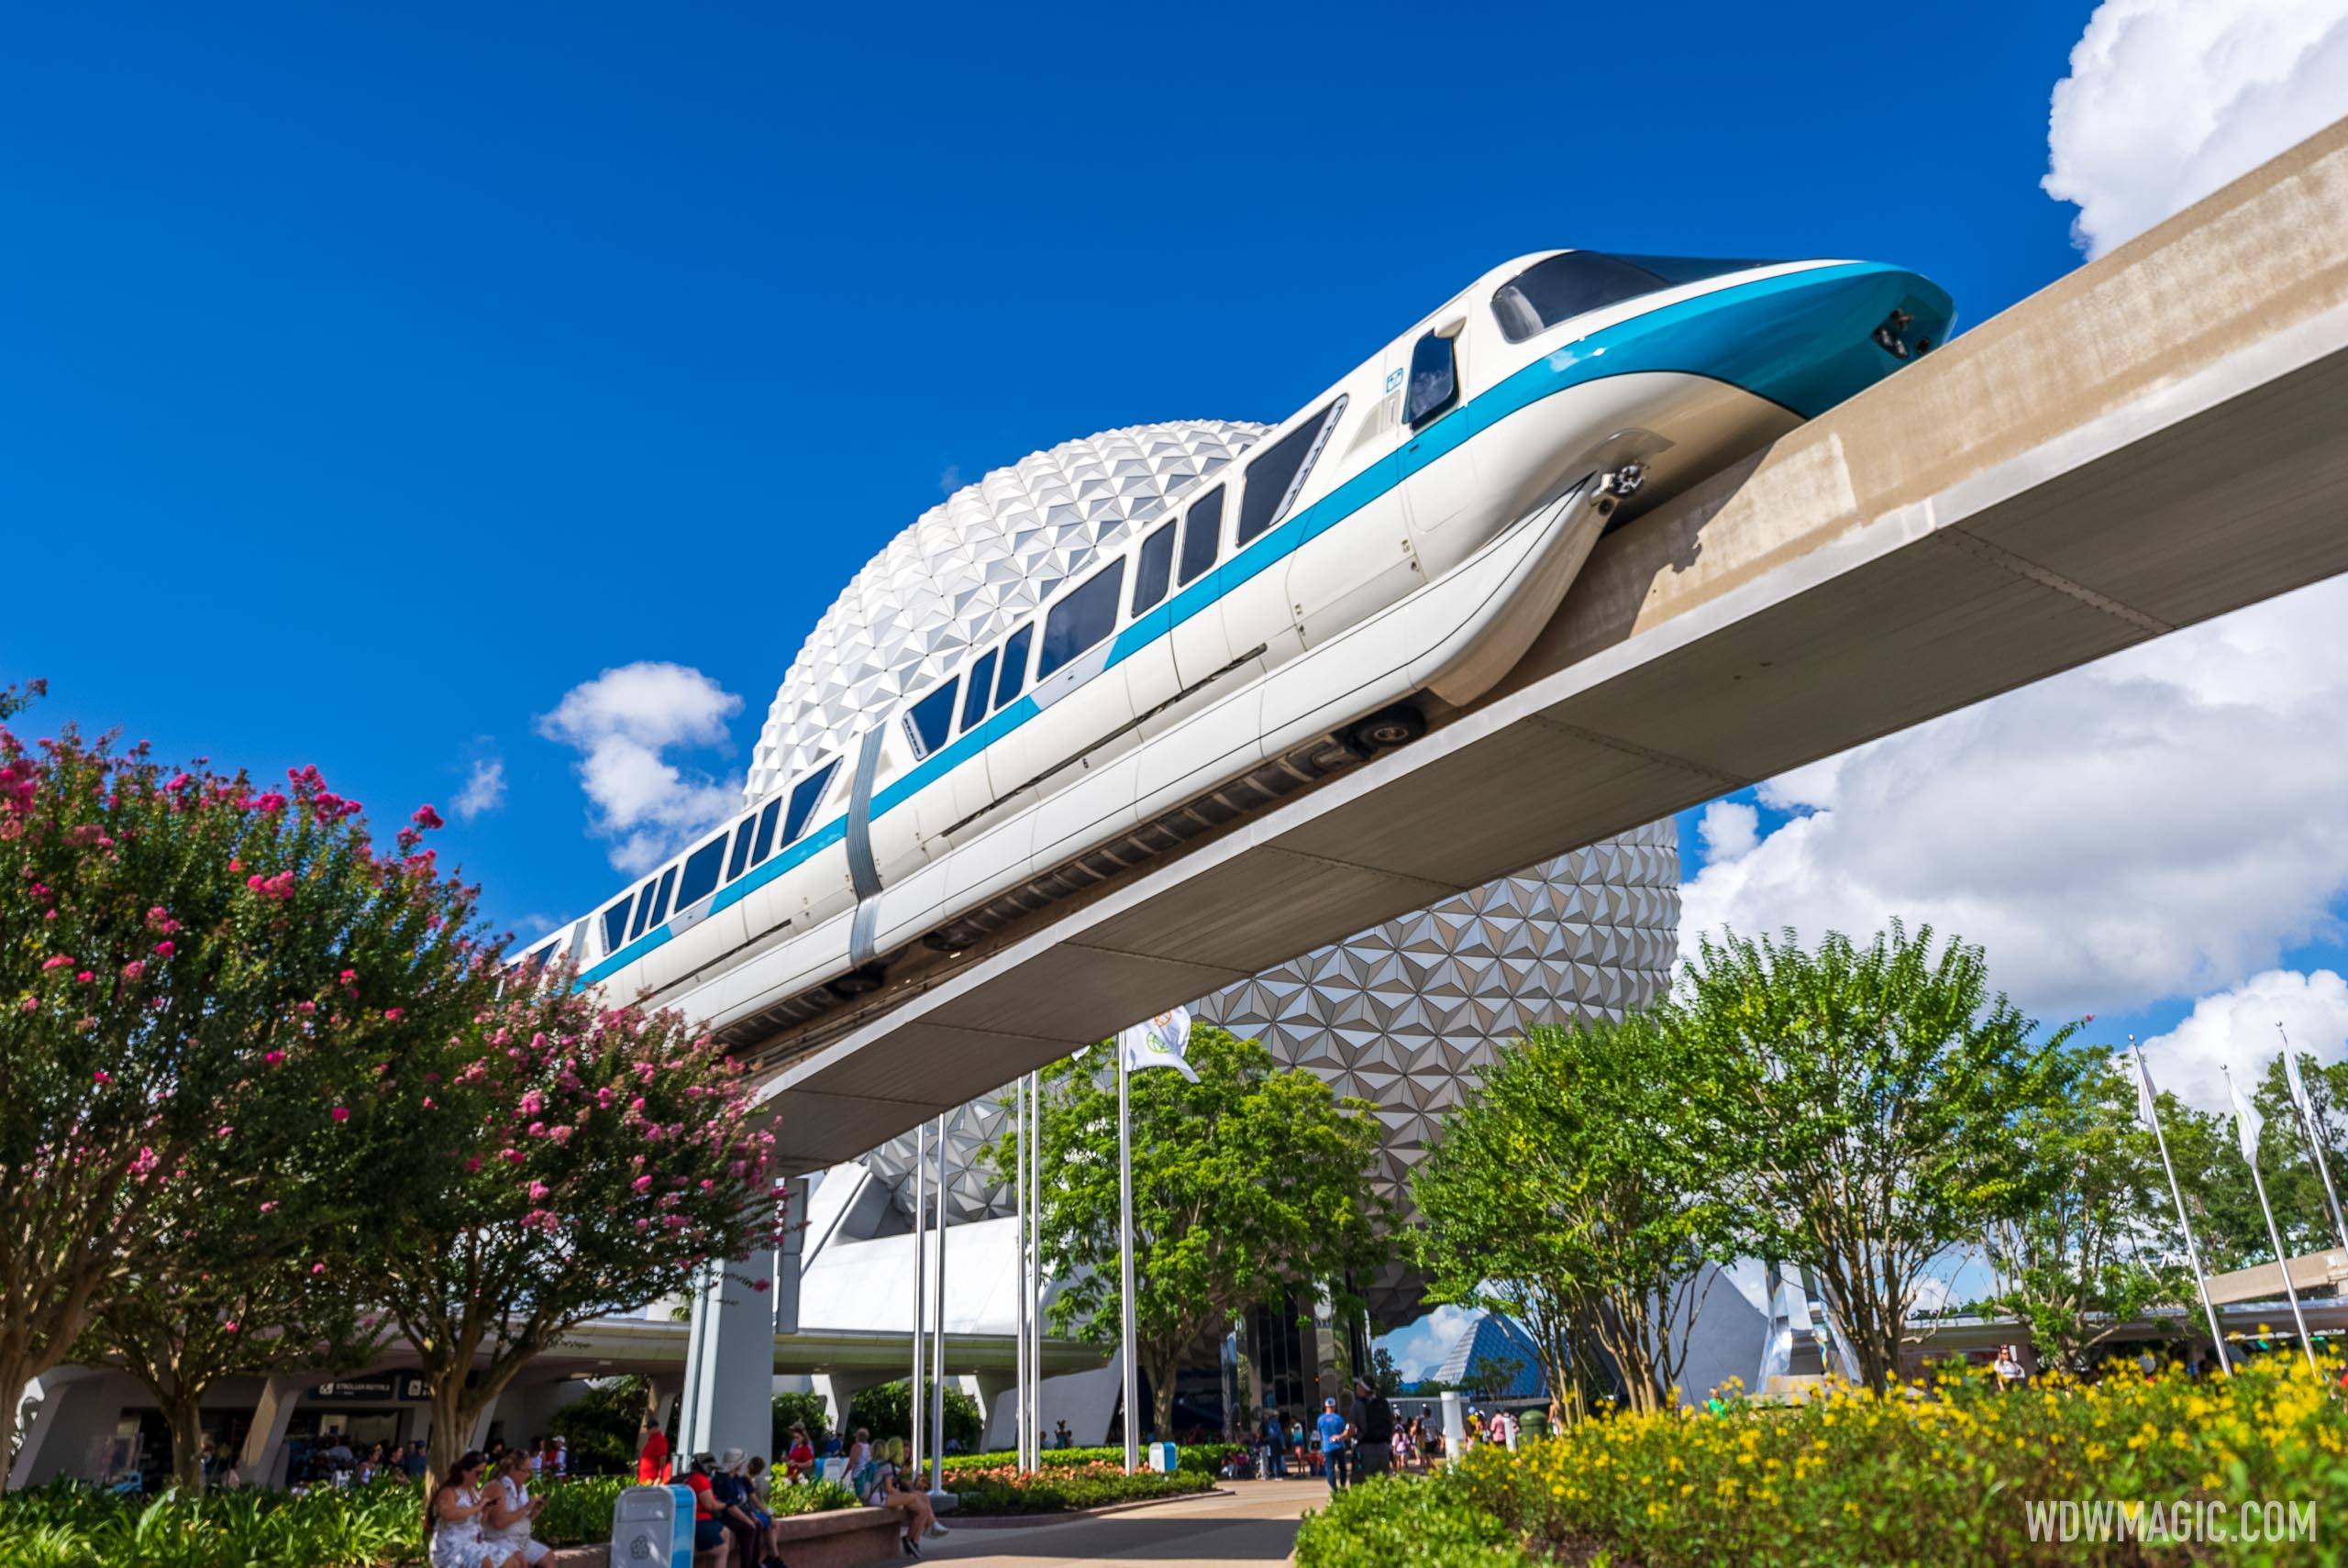 Walt Disney World Monorail System returns to EPCOT after 16 month closure